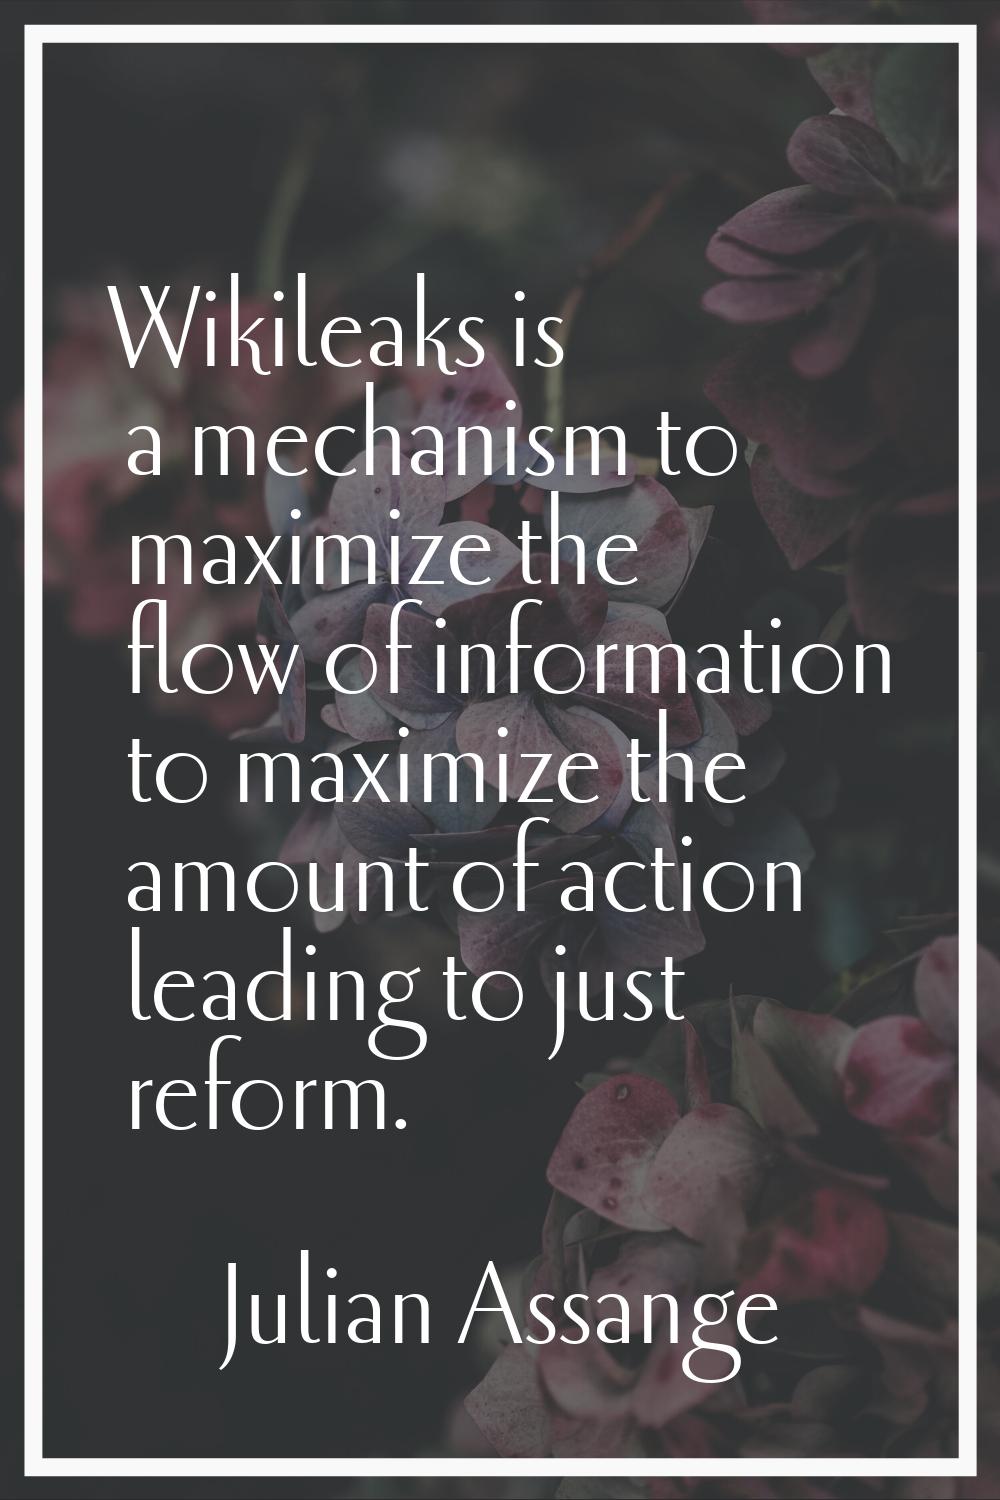 Wikileaks is a mechanism to maximize the flow of information to maximize the amount of action leadi